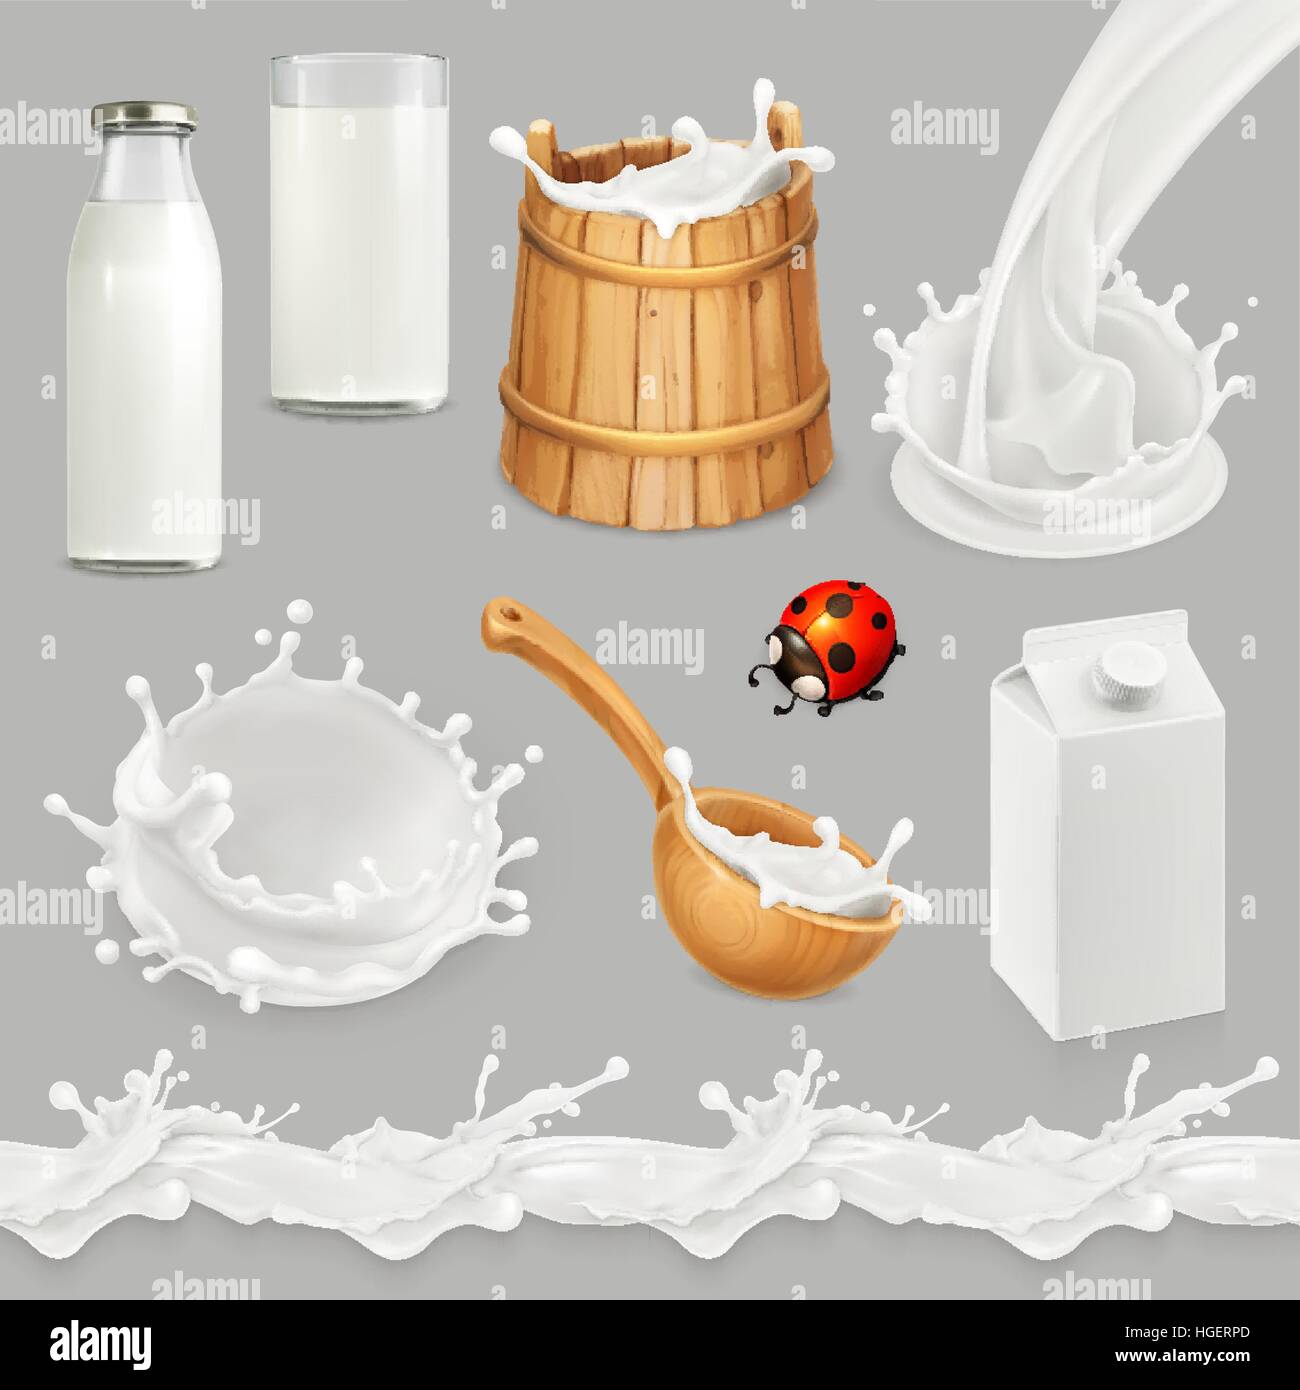 Milk. Bottle, glass, spoon, bucket. Drops seamless pattern. Natural dairy products. 3d vector object set Stock Vector